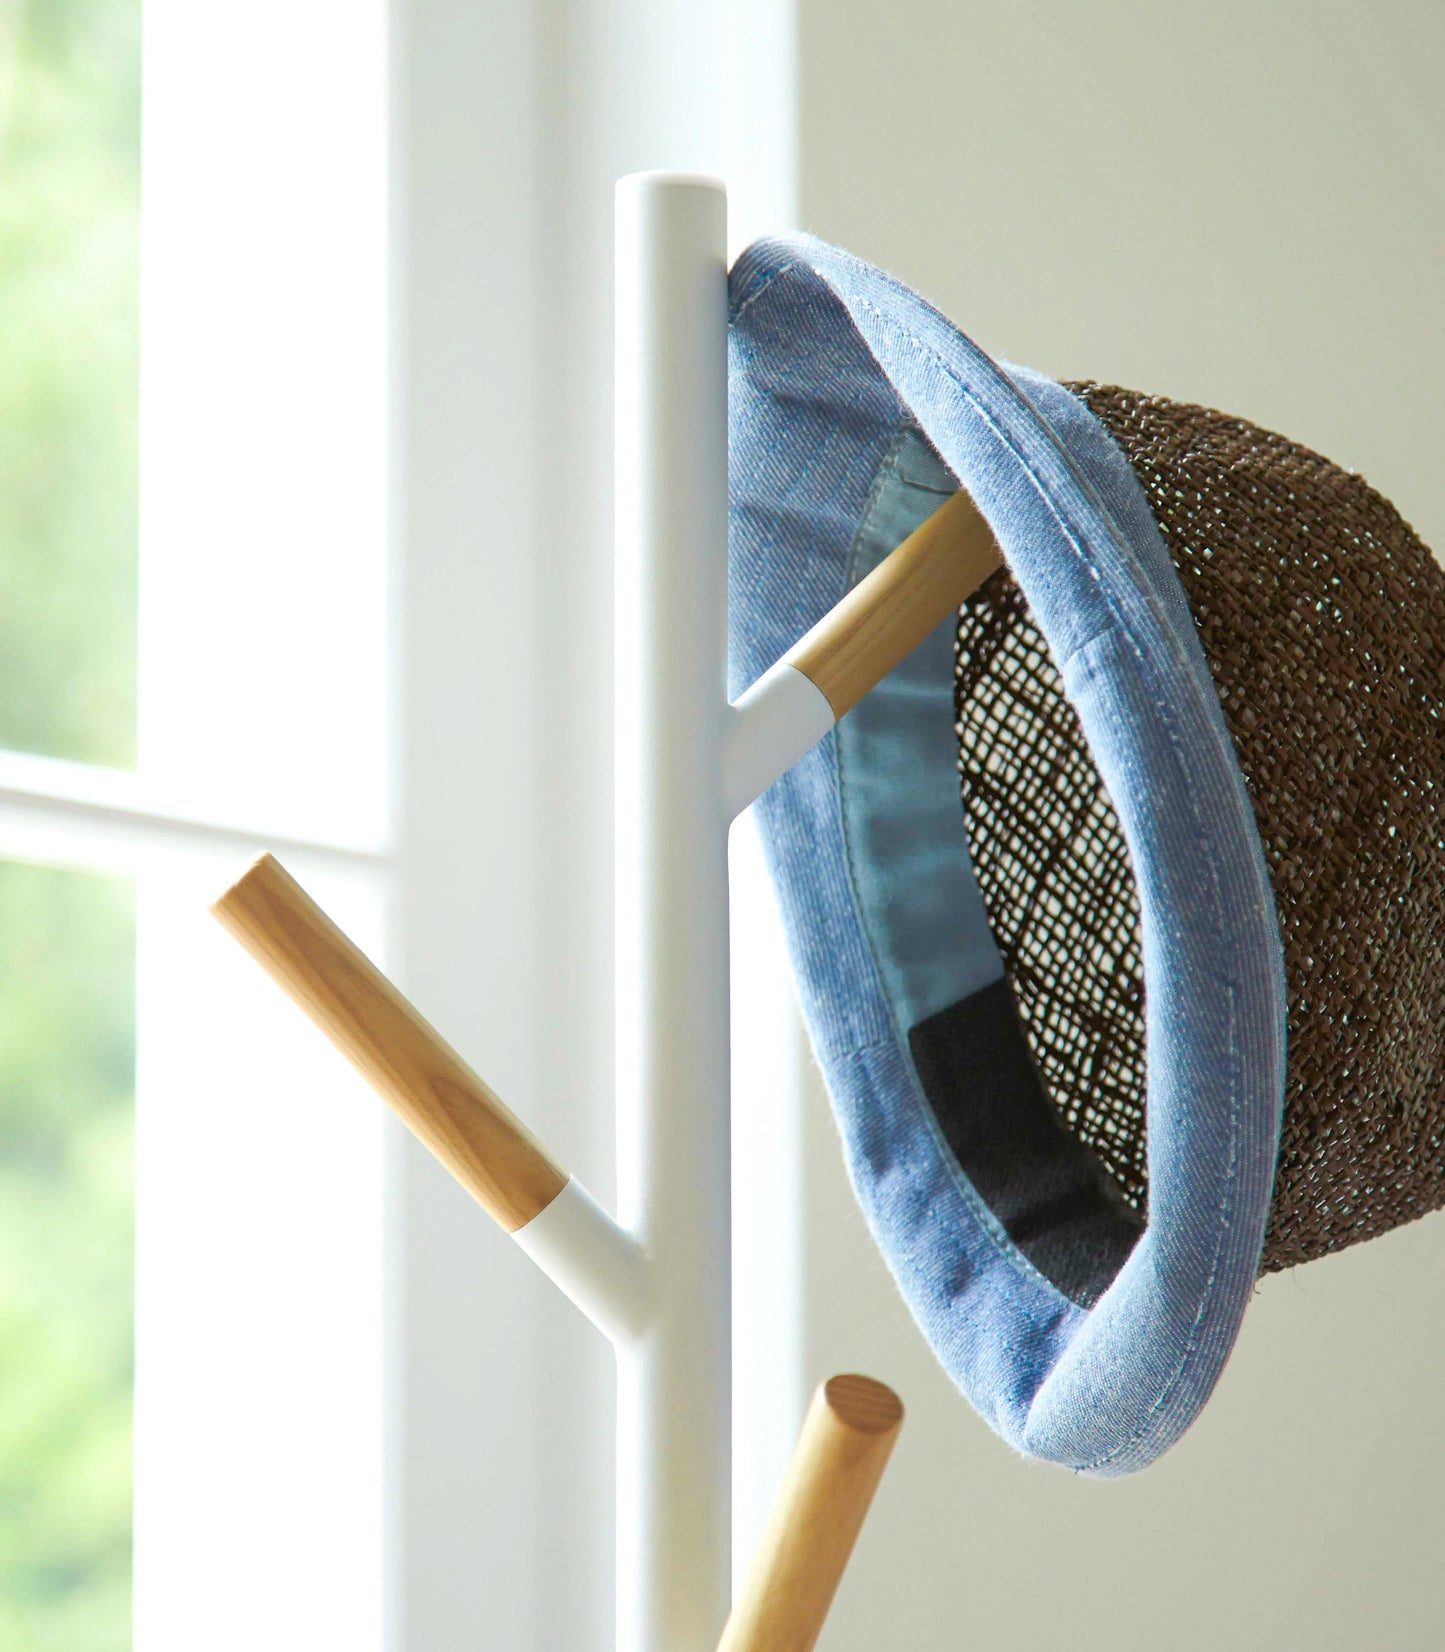 Wood Branch Steel Coat Rack in white by Yamazaki with a hat resting on the peg